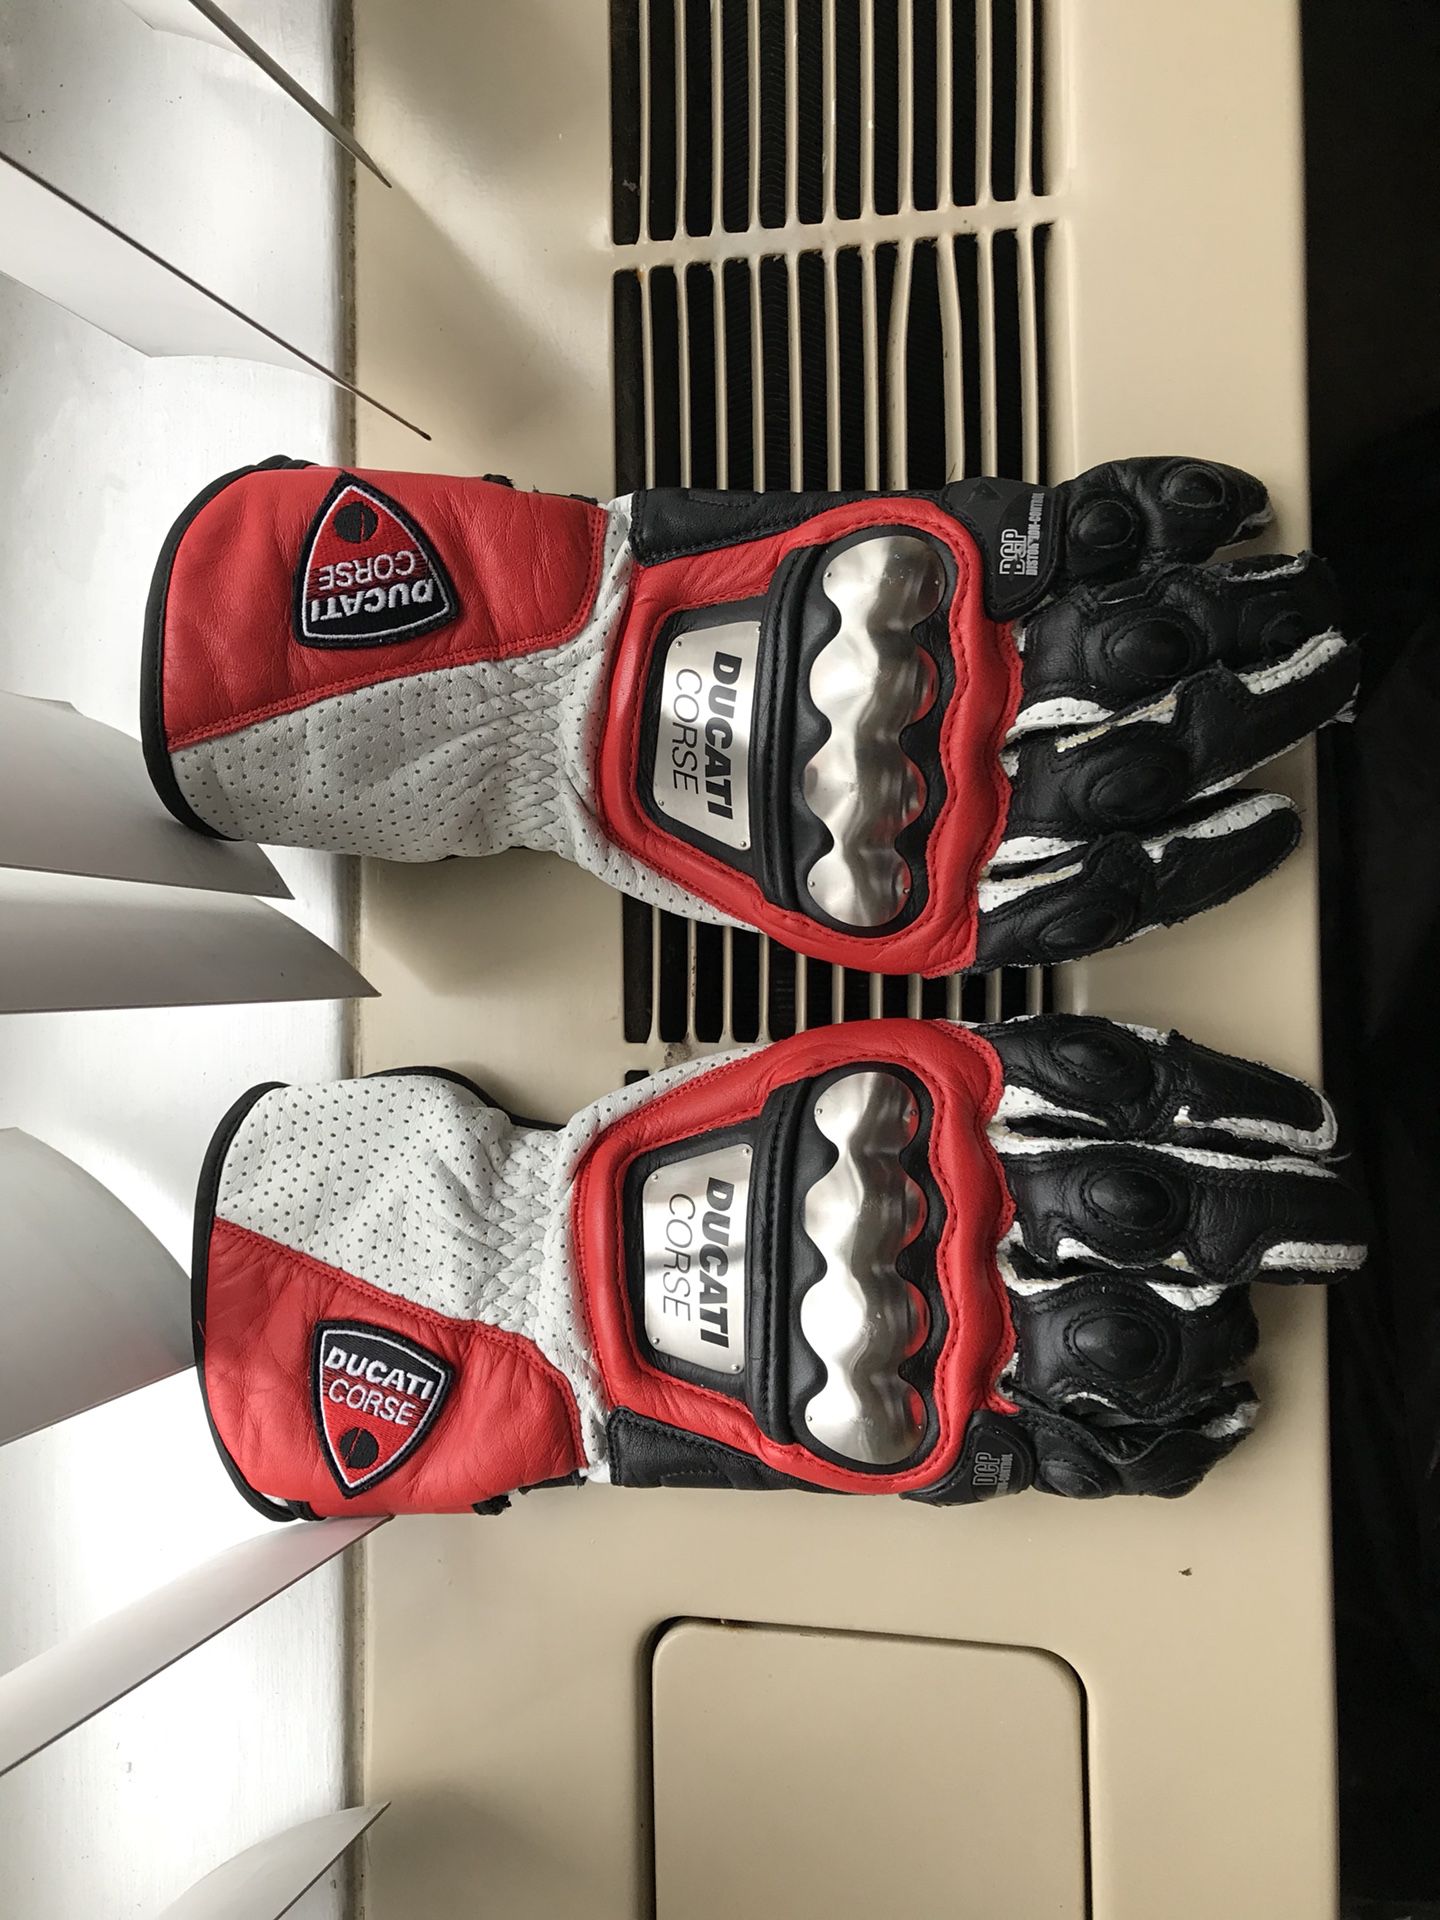 Ducati Corse Gloves Size M for $105 or Best Offer